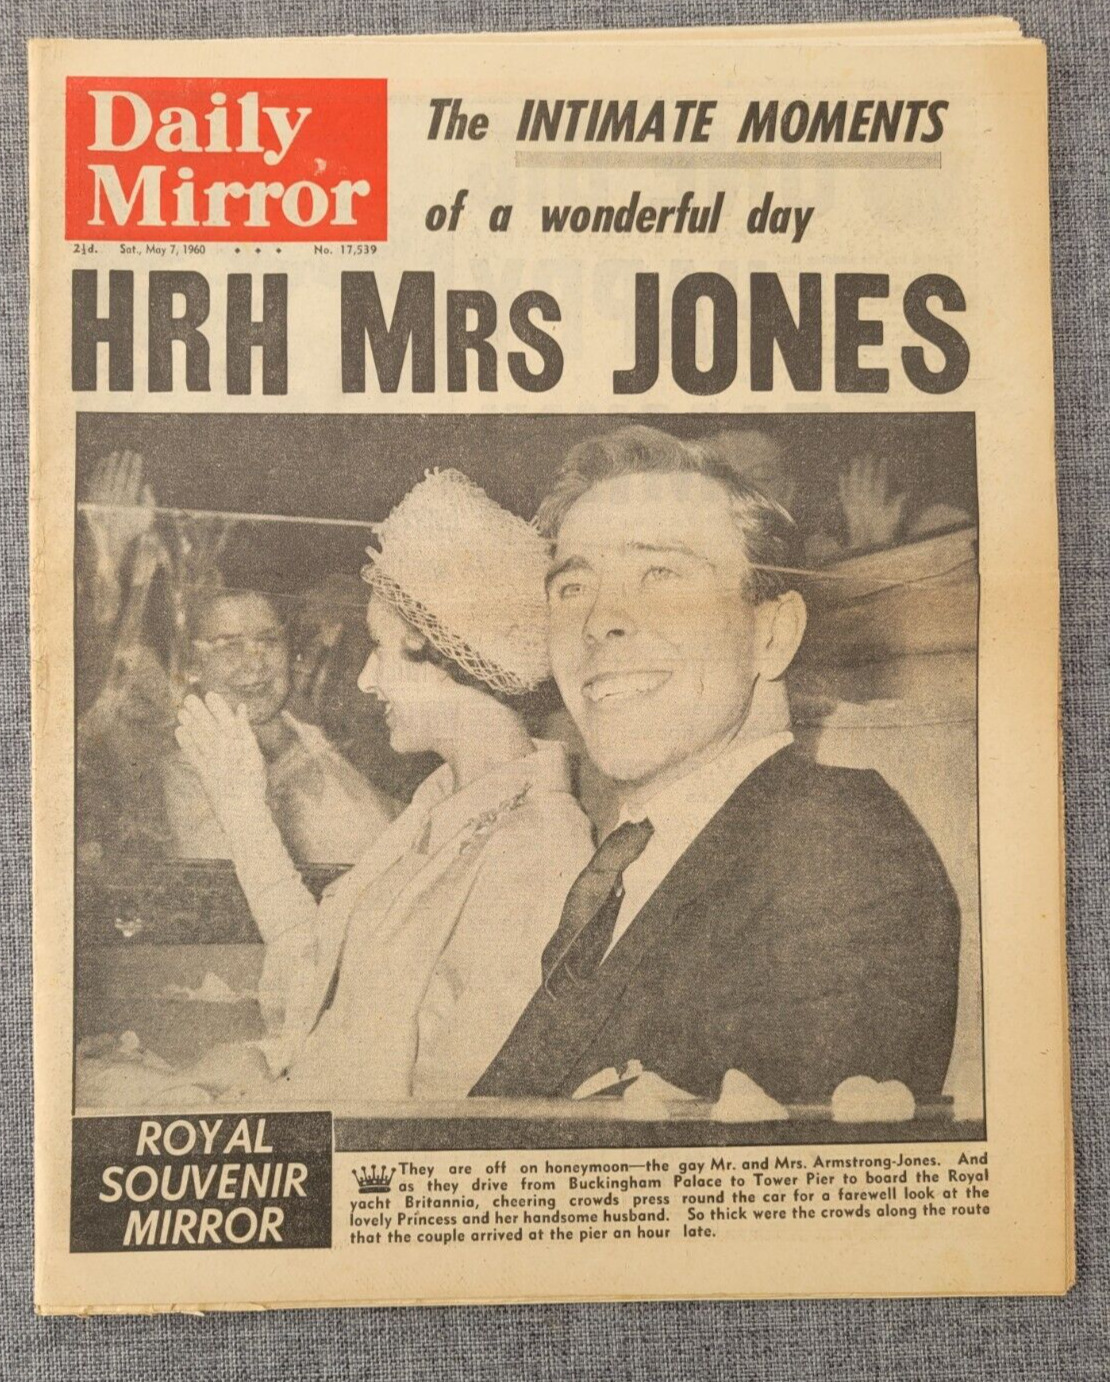 DAILY MIRROR 7 MAY 1960 PRINCESS MARGARET MR AND MRS ARMSTRONG JONES NEWSPAPER